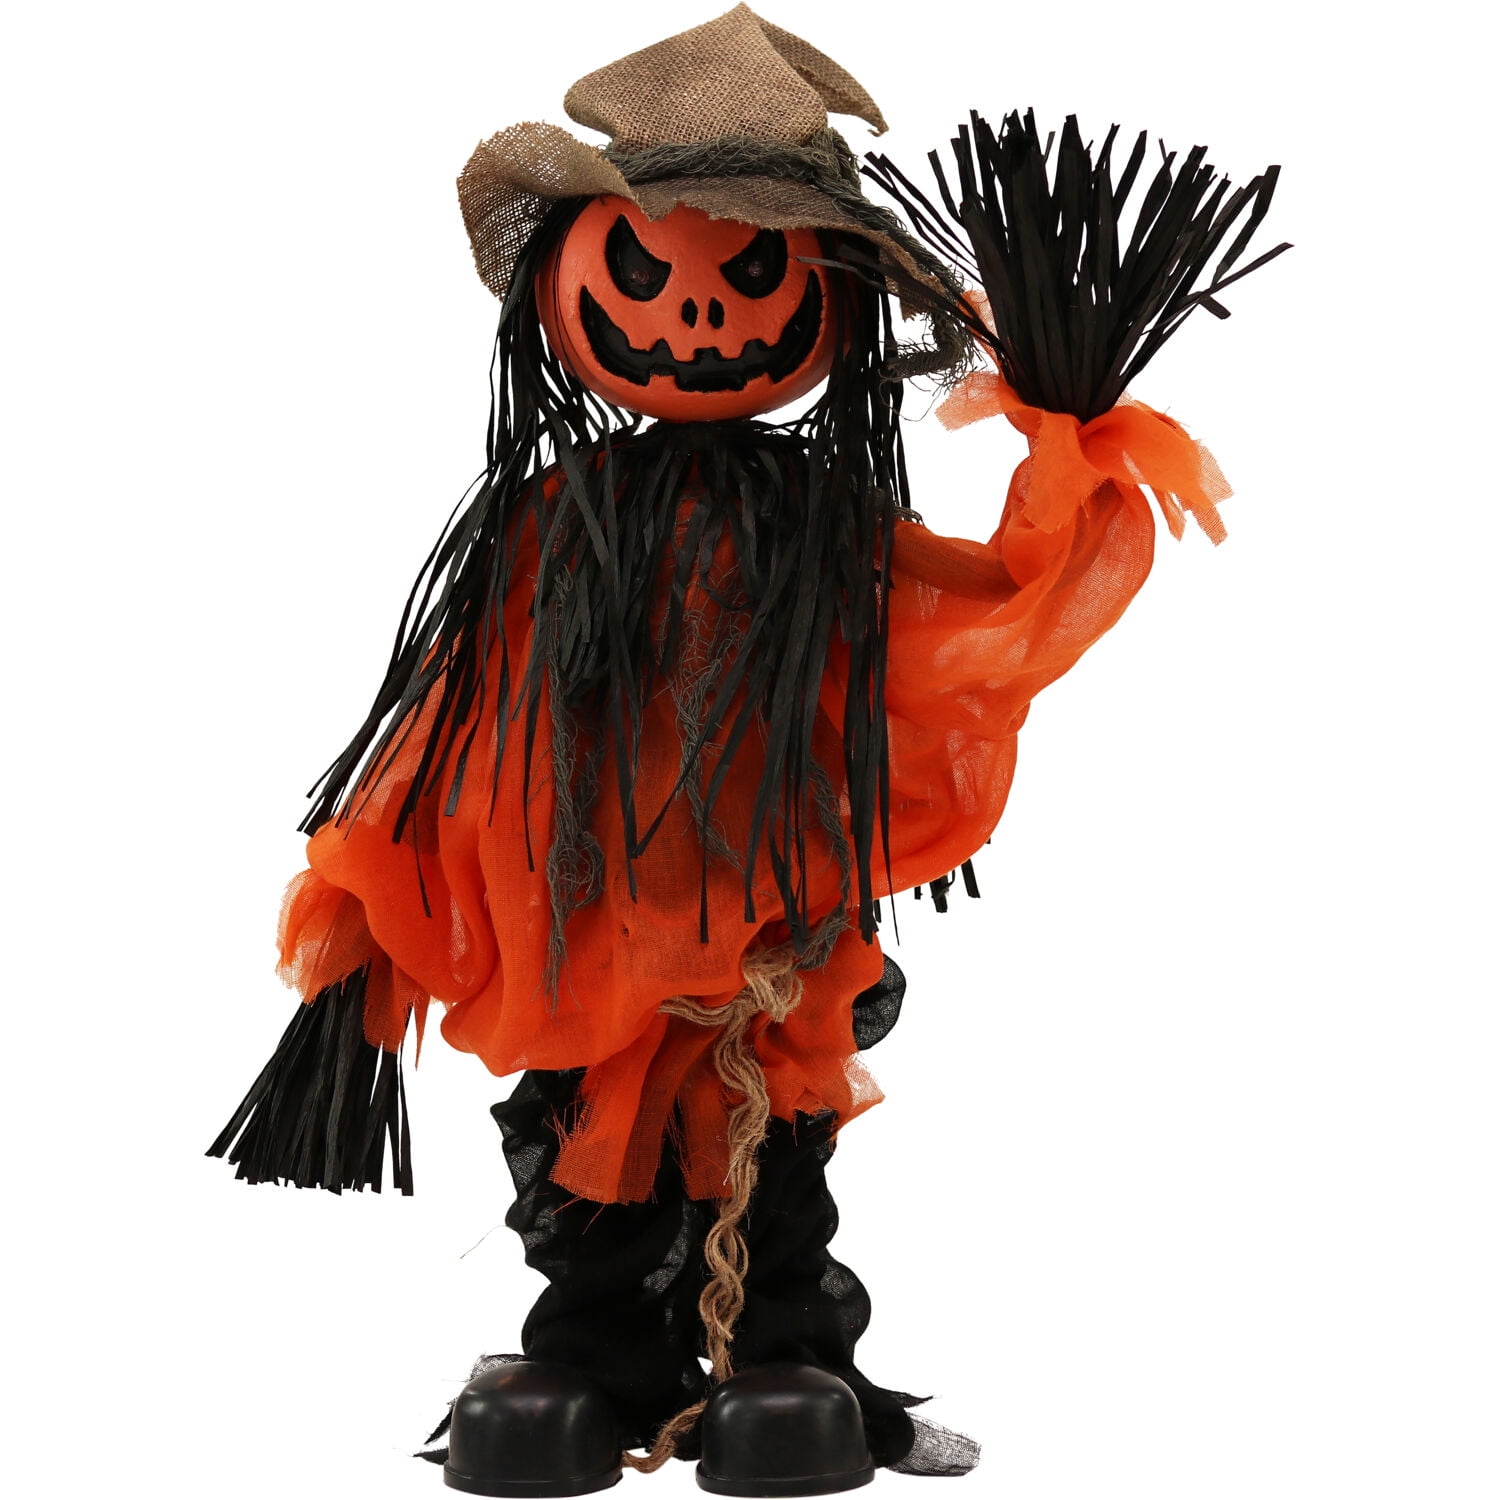 Animated SCORCHED PUMPKIN SCARECROW & FOG MACHINE Halloween Haunted House Prop 